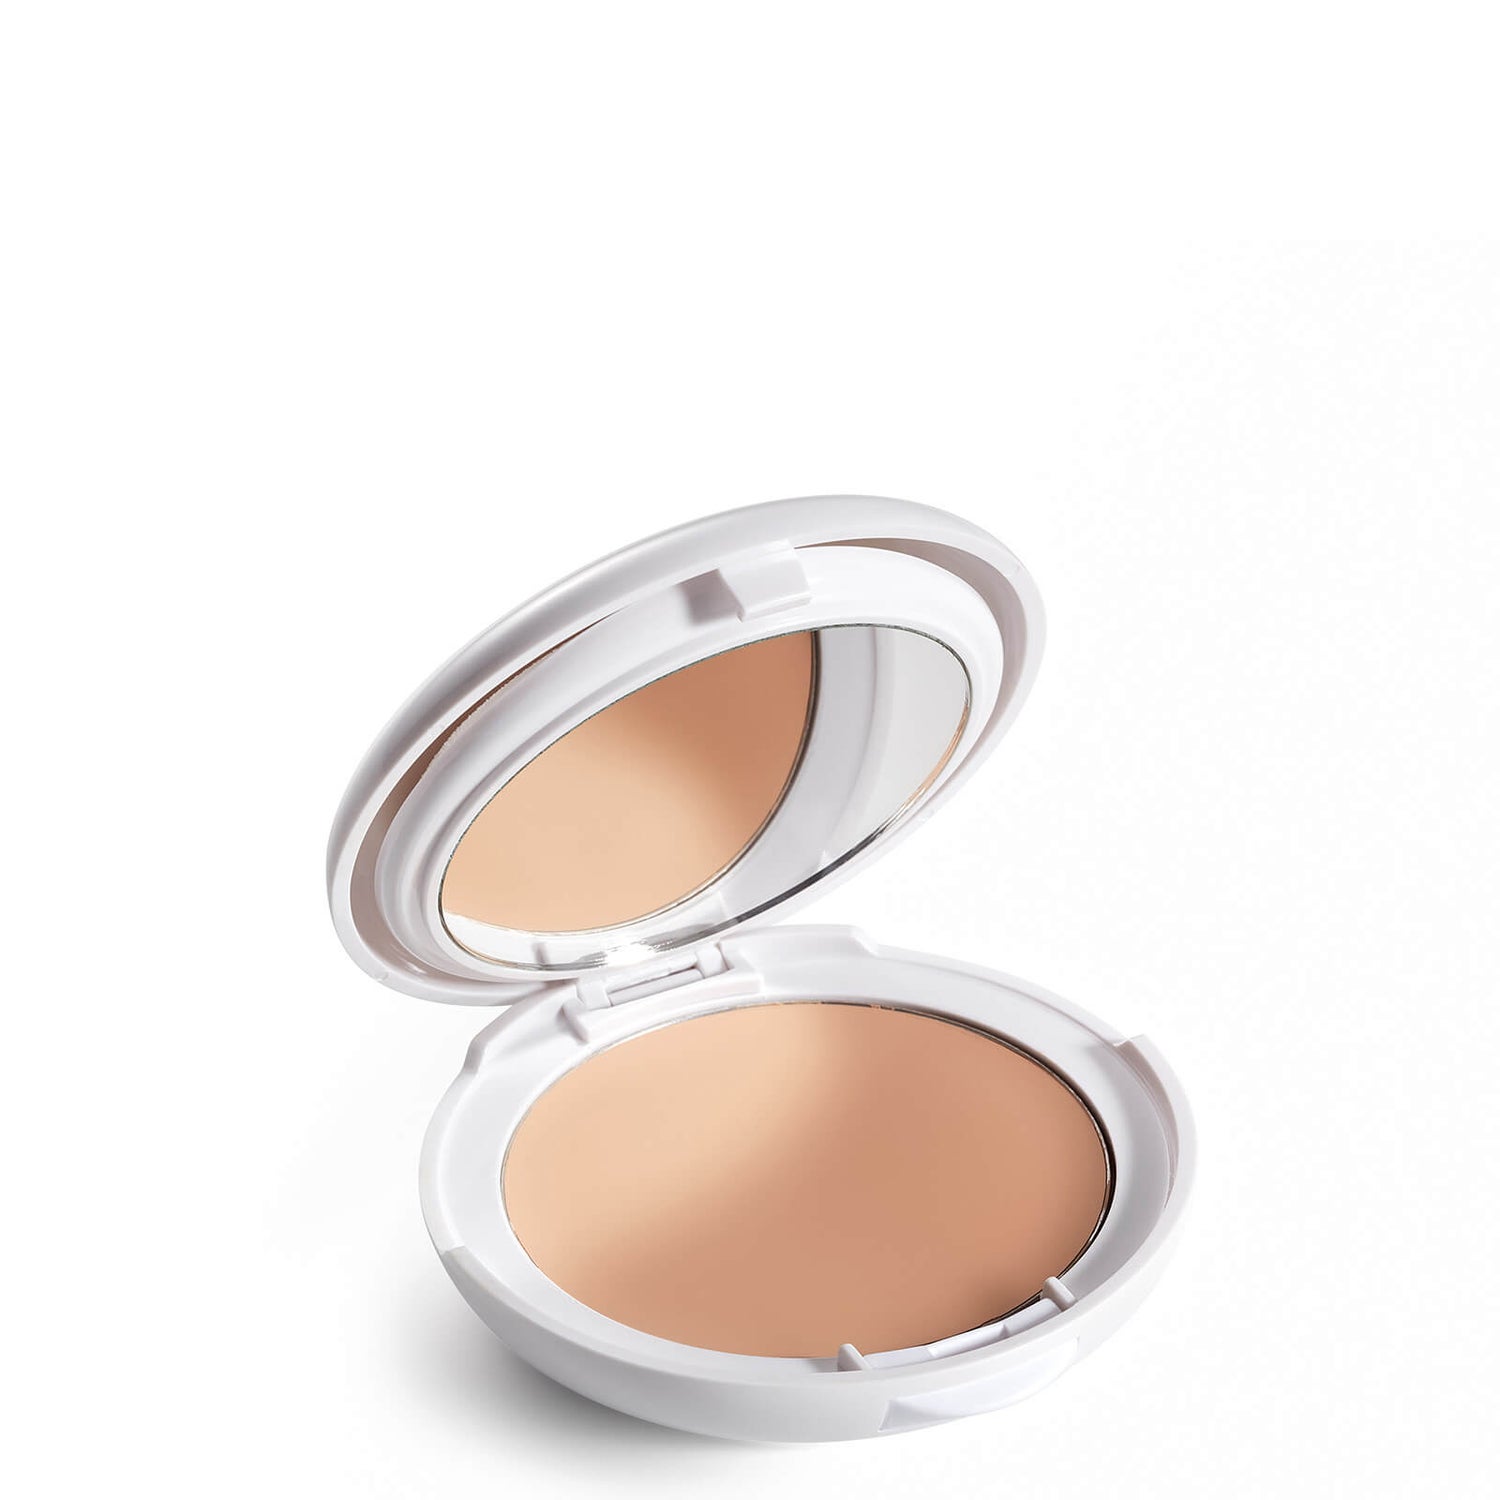 Uriage Eau Thermale Water Cream Tinted Compact SPF30 10g